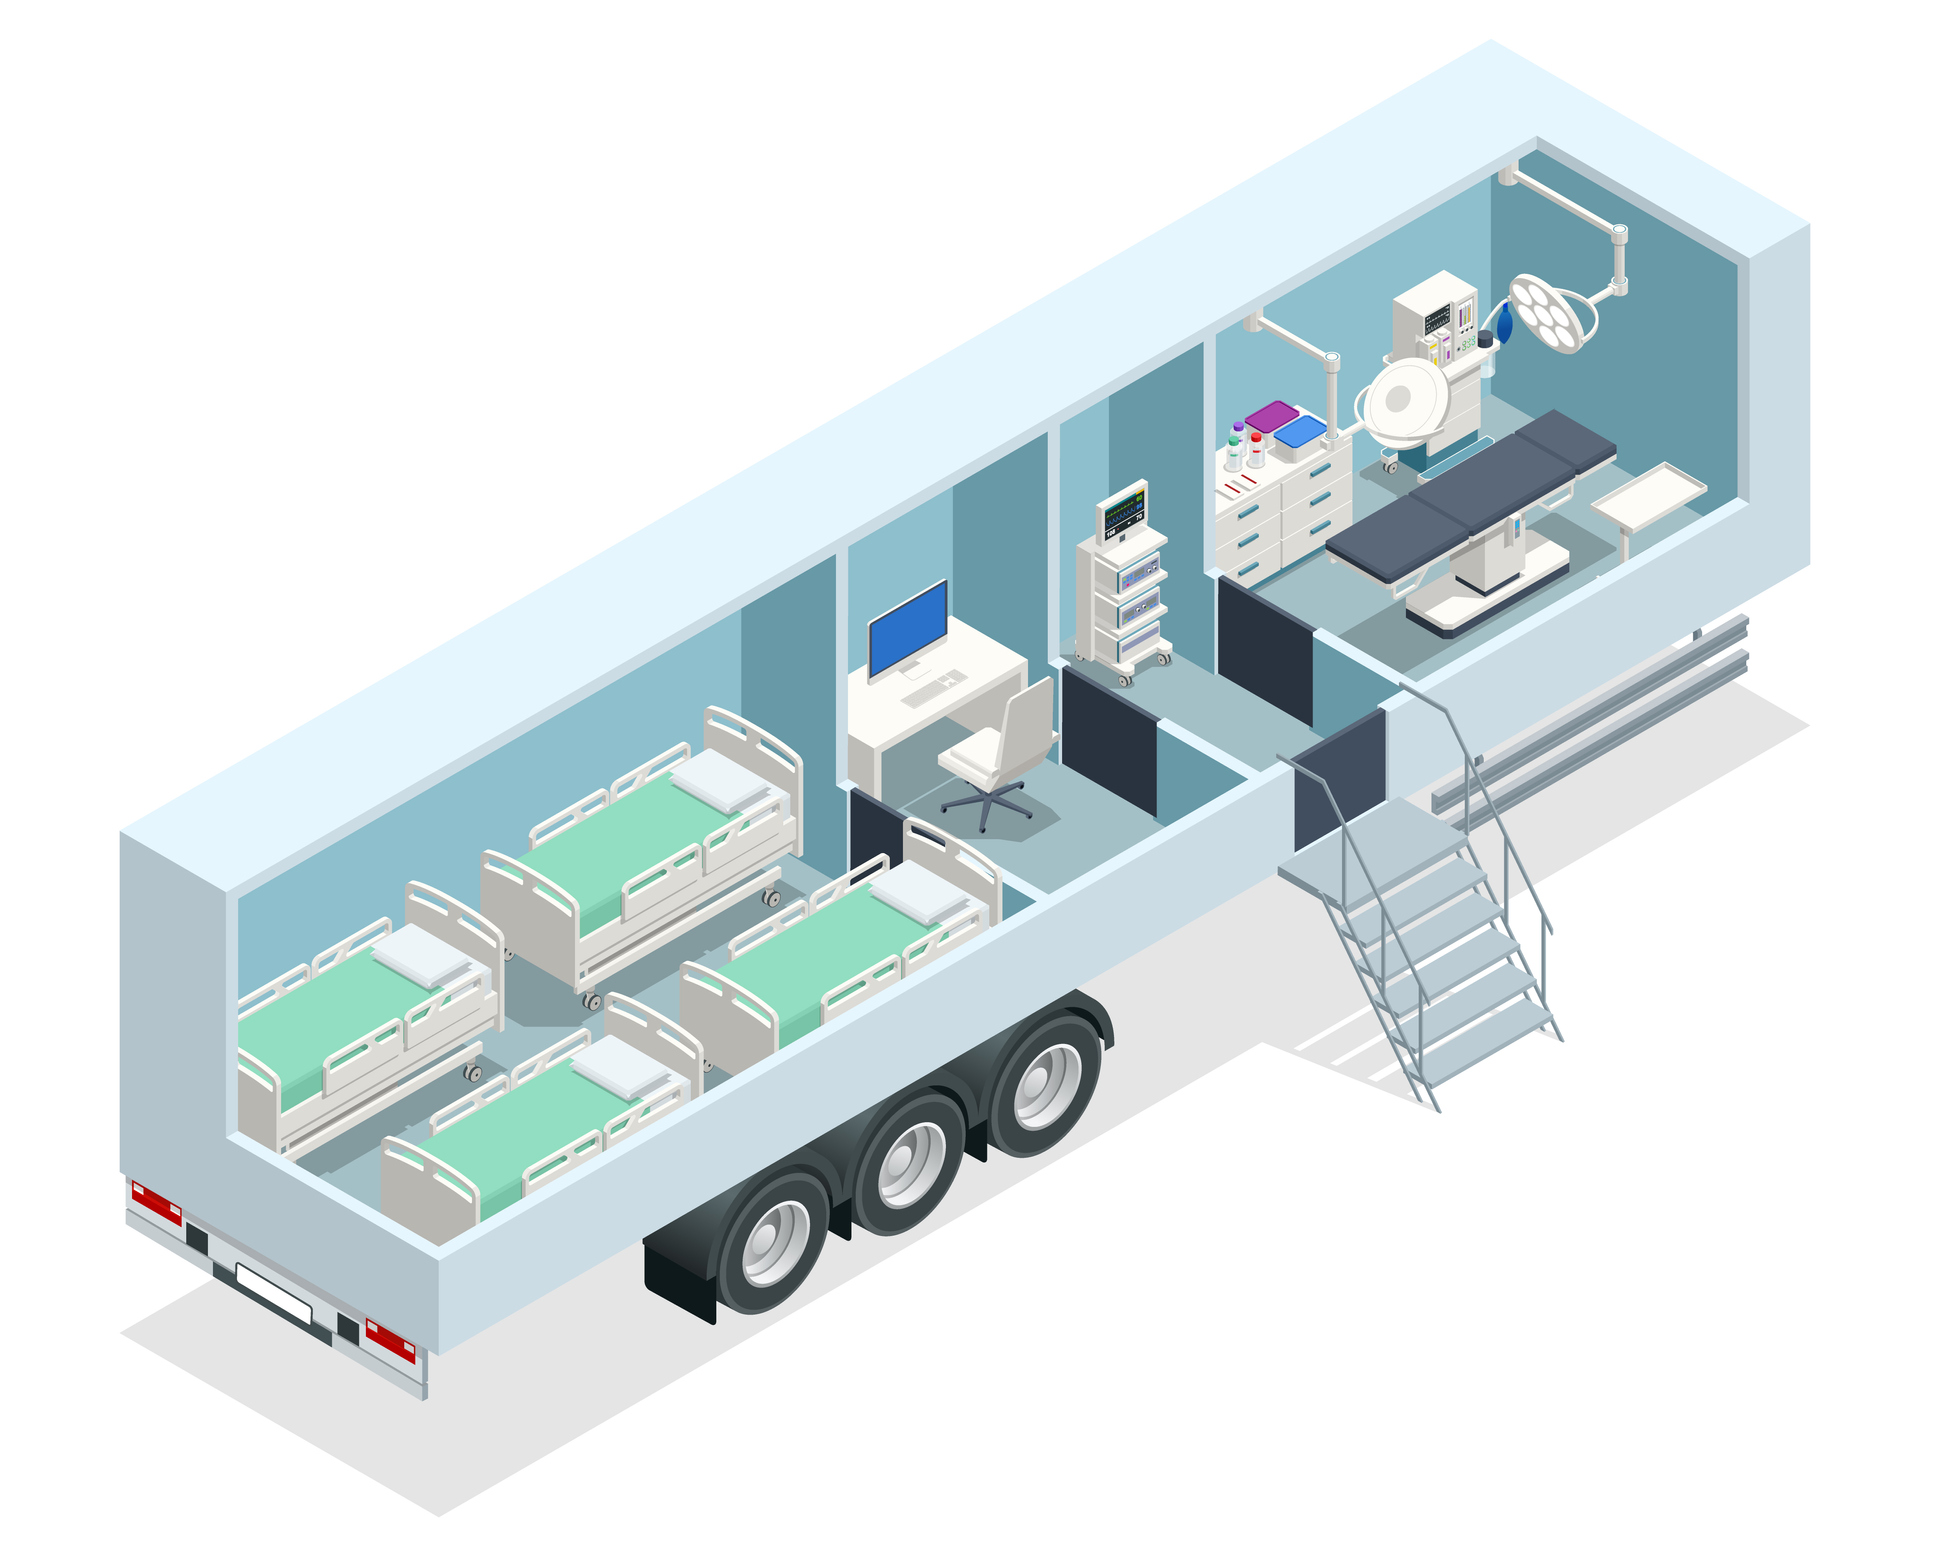 Isometric hospital in the car. Mobile hospital with medical beds, laboratory and operating room